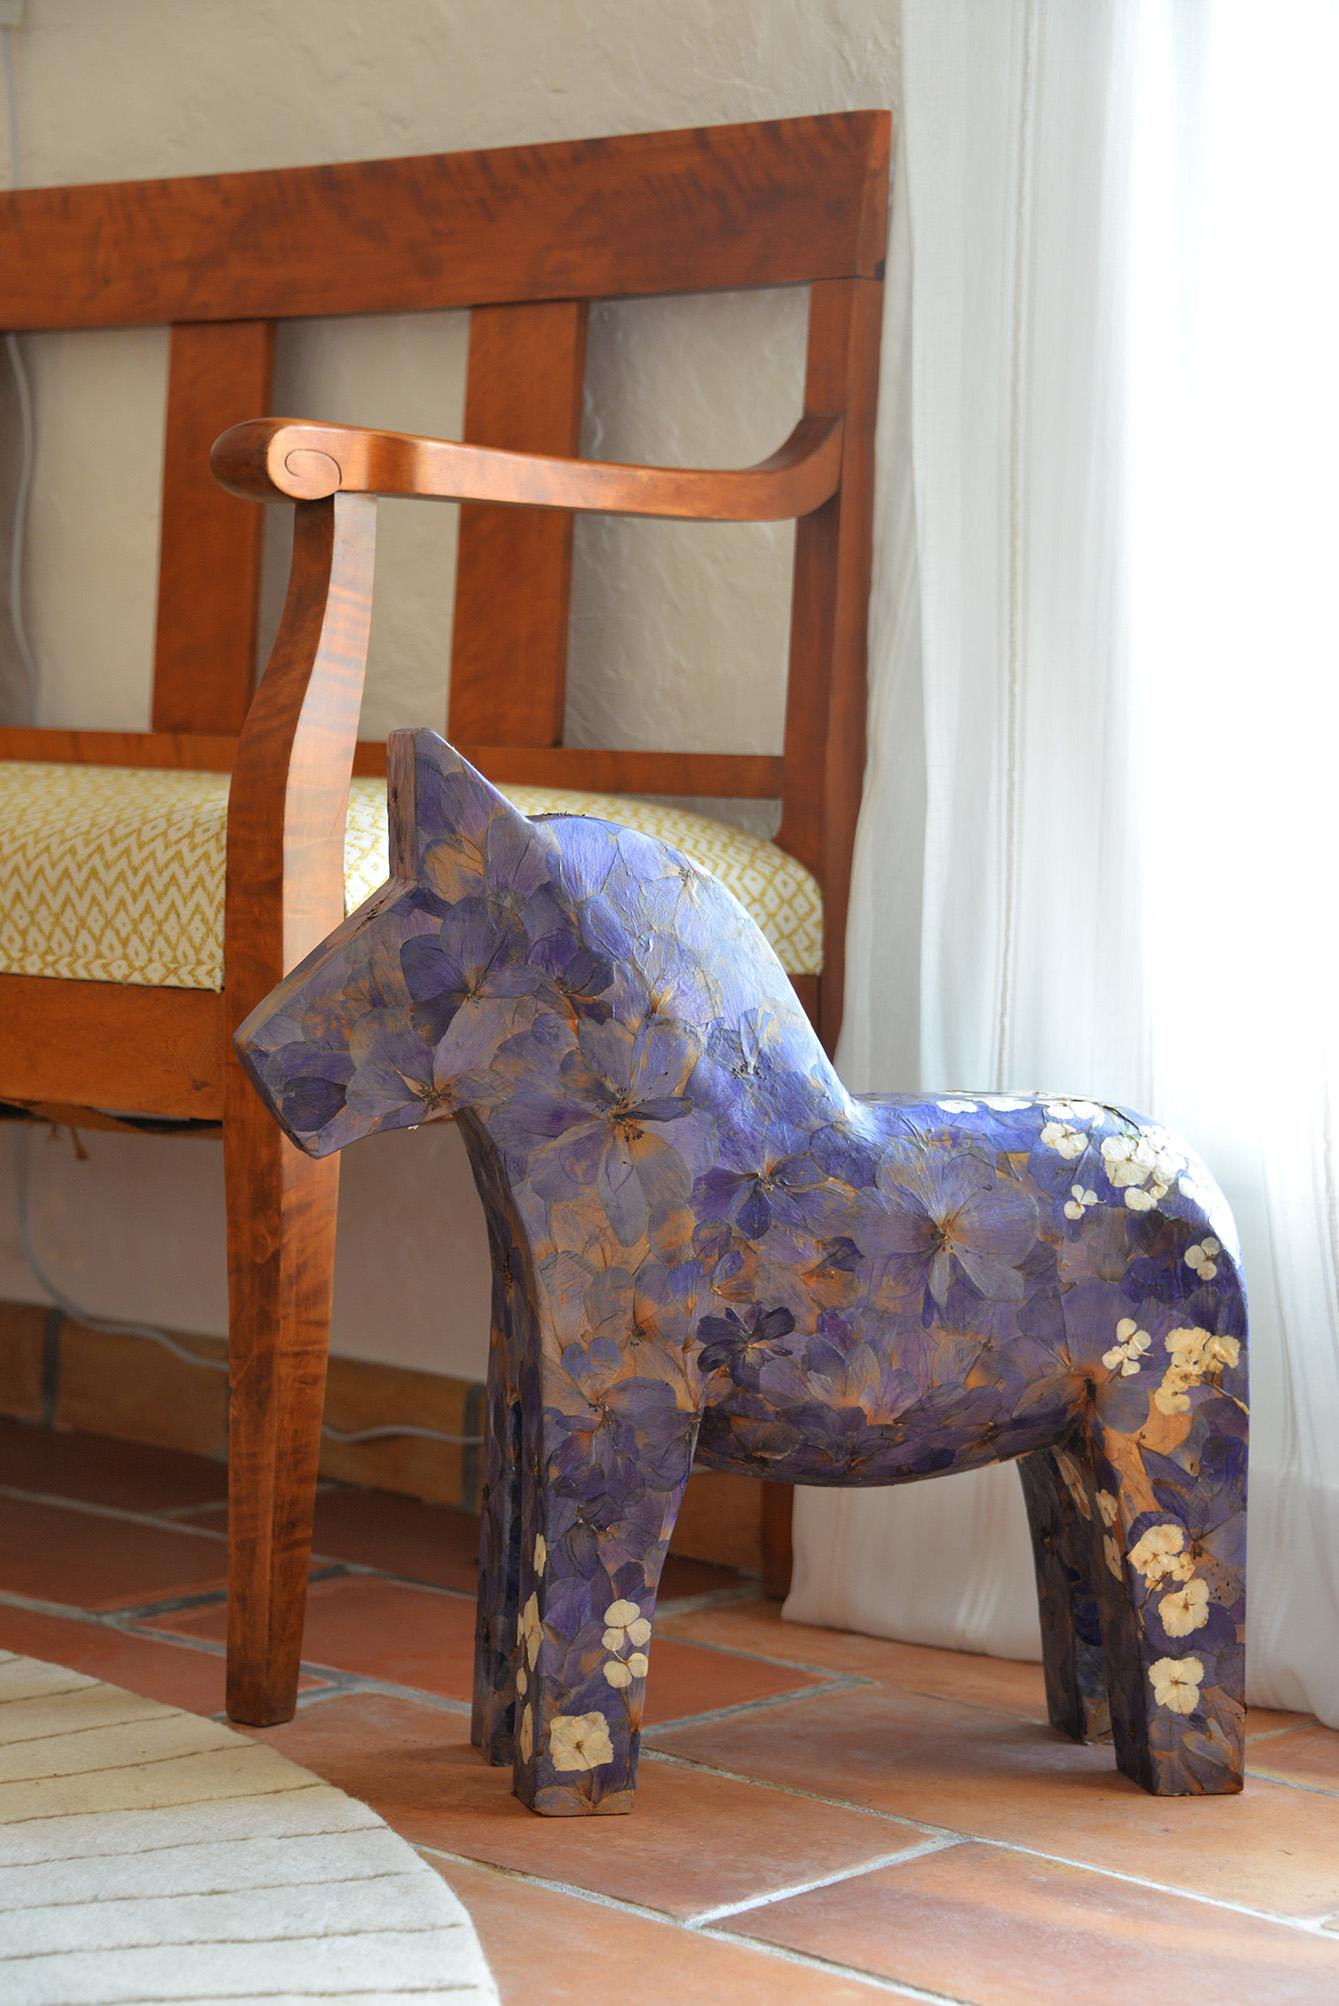 Hanami, pressed flowers on wood horse  - Brown Figurative Sculpture by K-OD